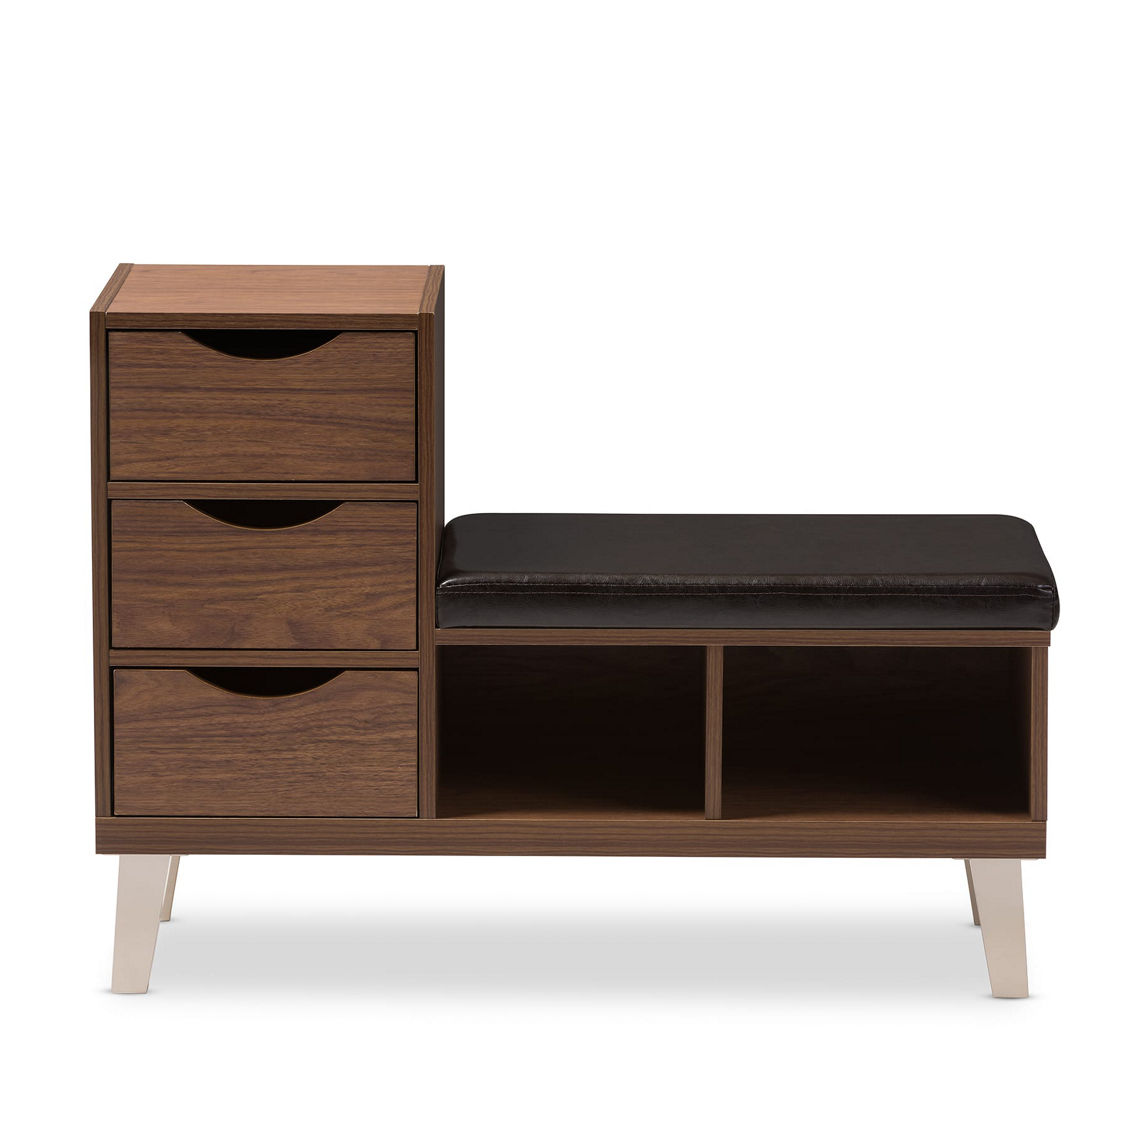 Baxton Studio Arielle Walnut Wood 3-Drawer Shoe Storage With Faux Leather Bench - Image 2 of 5